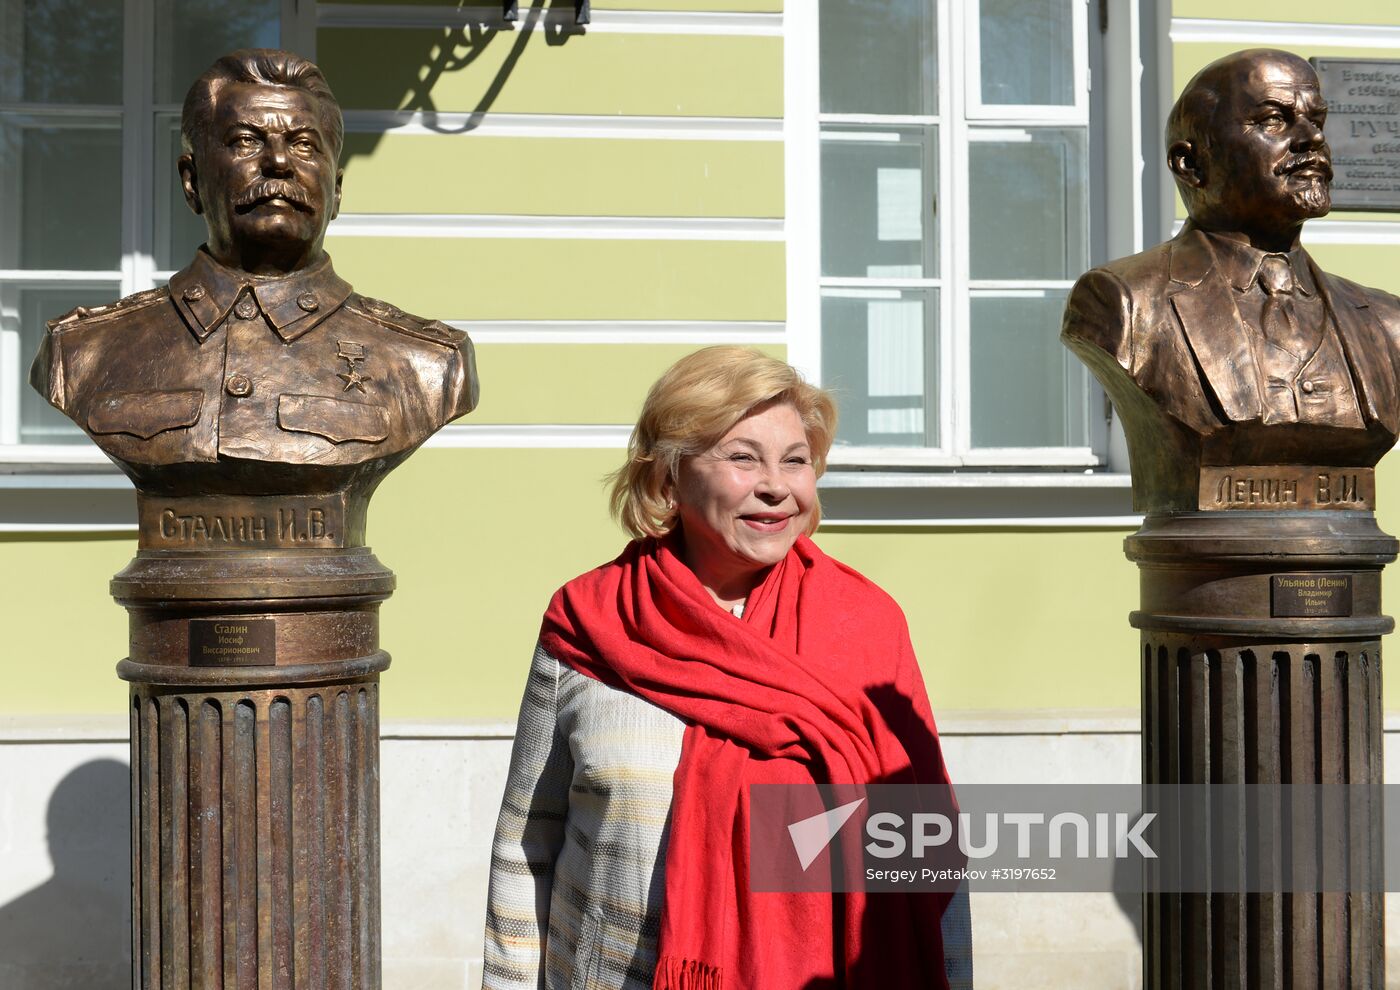 Moscow unveils Alley Of 20th Century Rulers